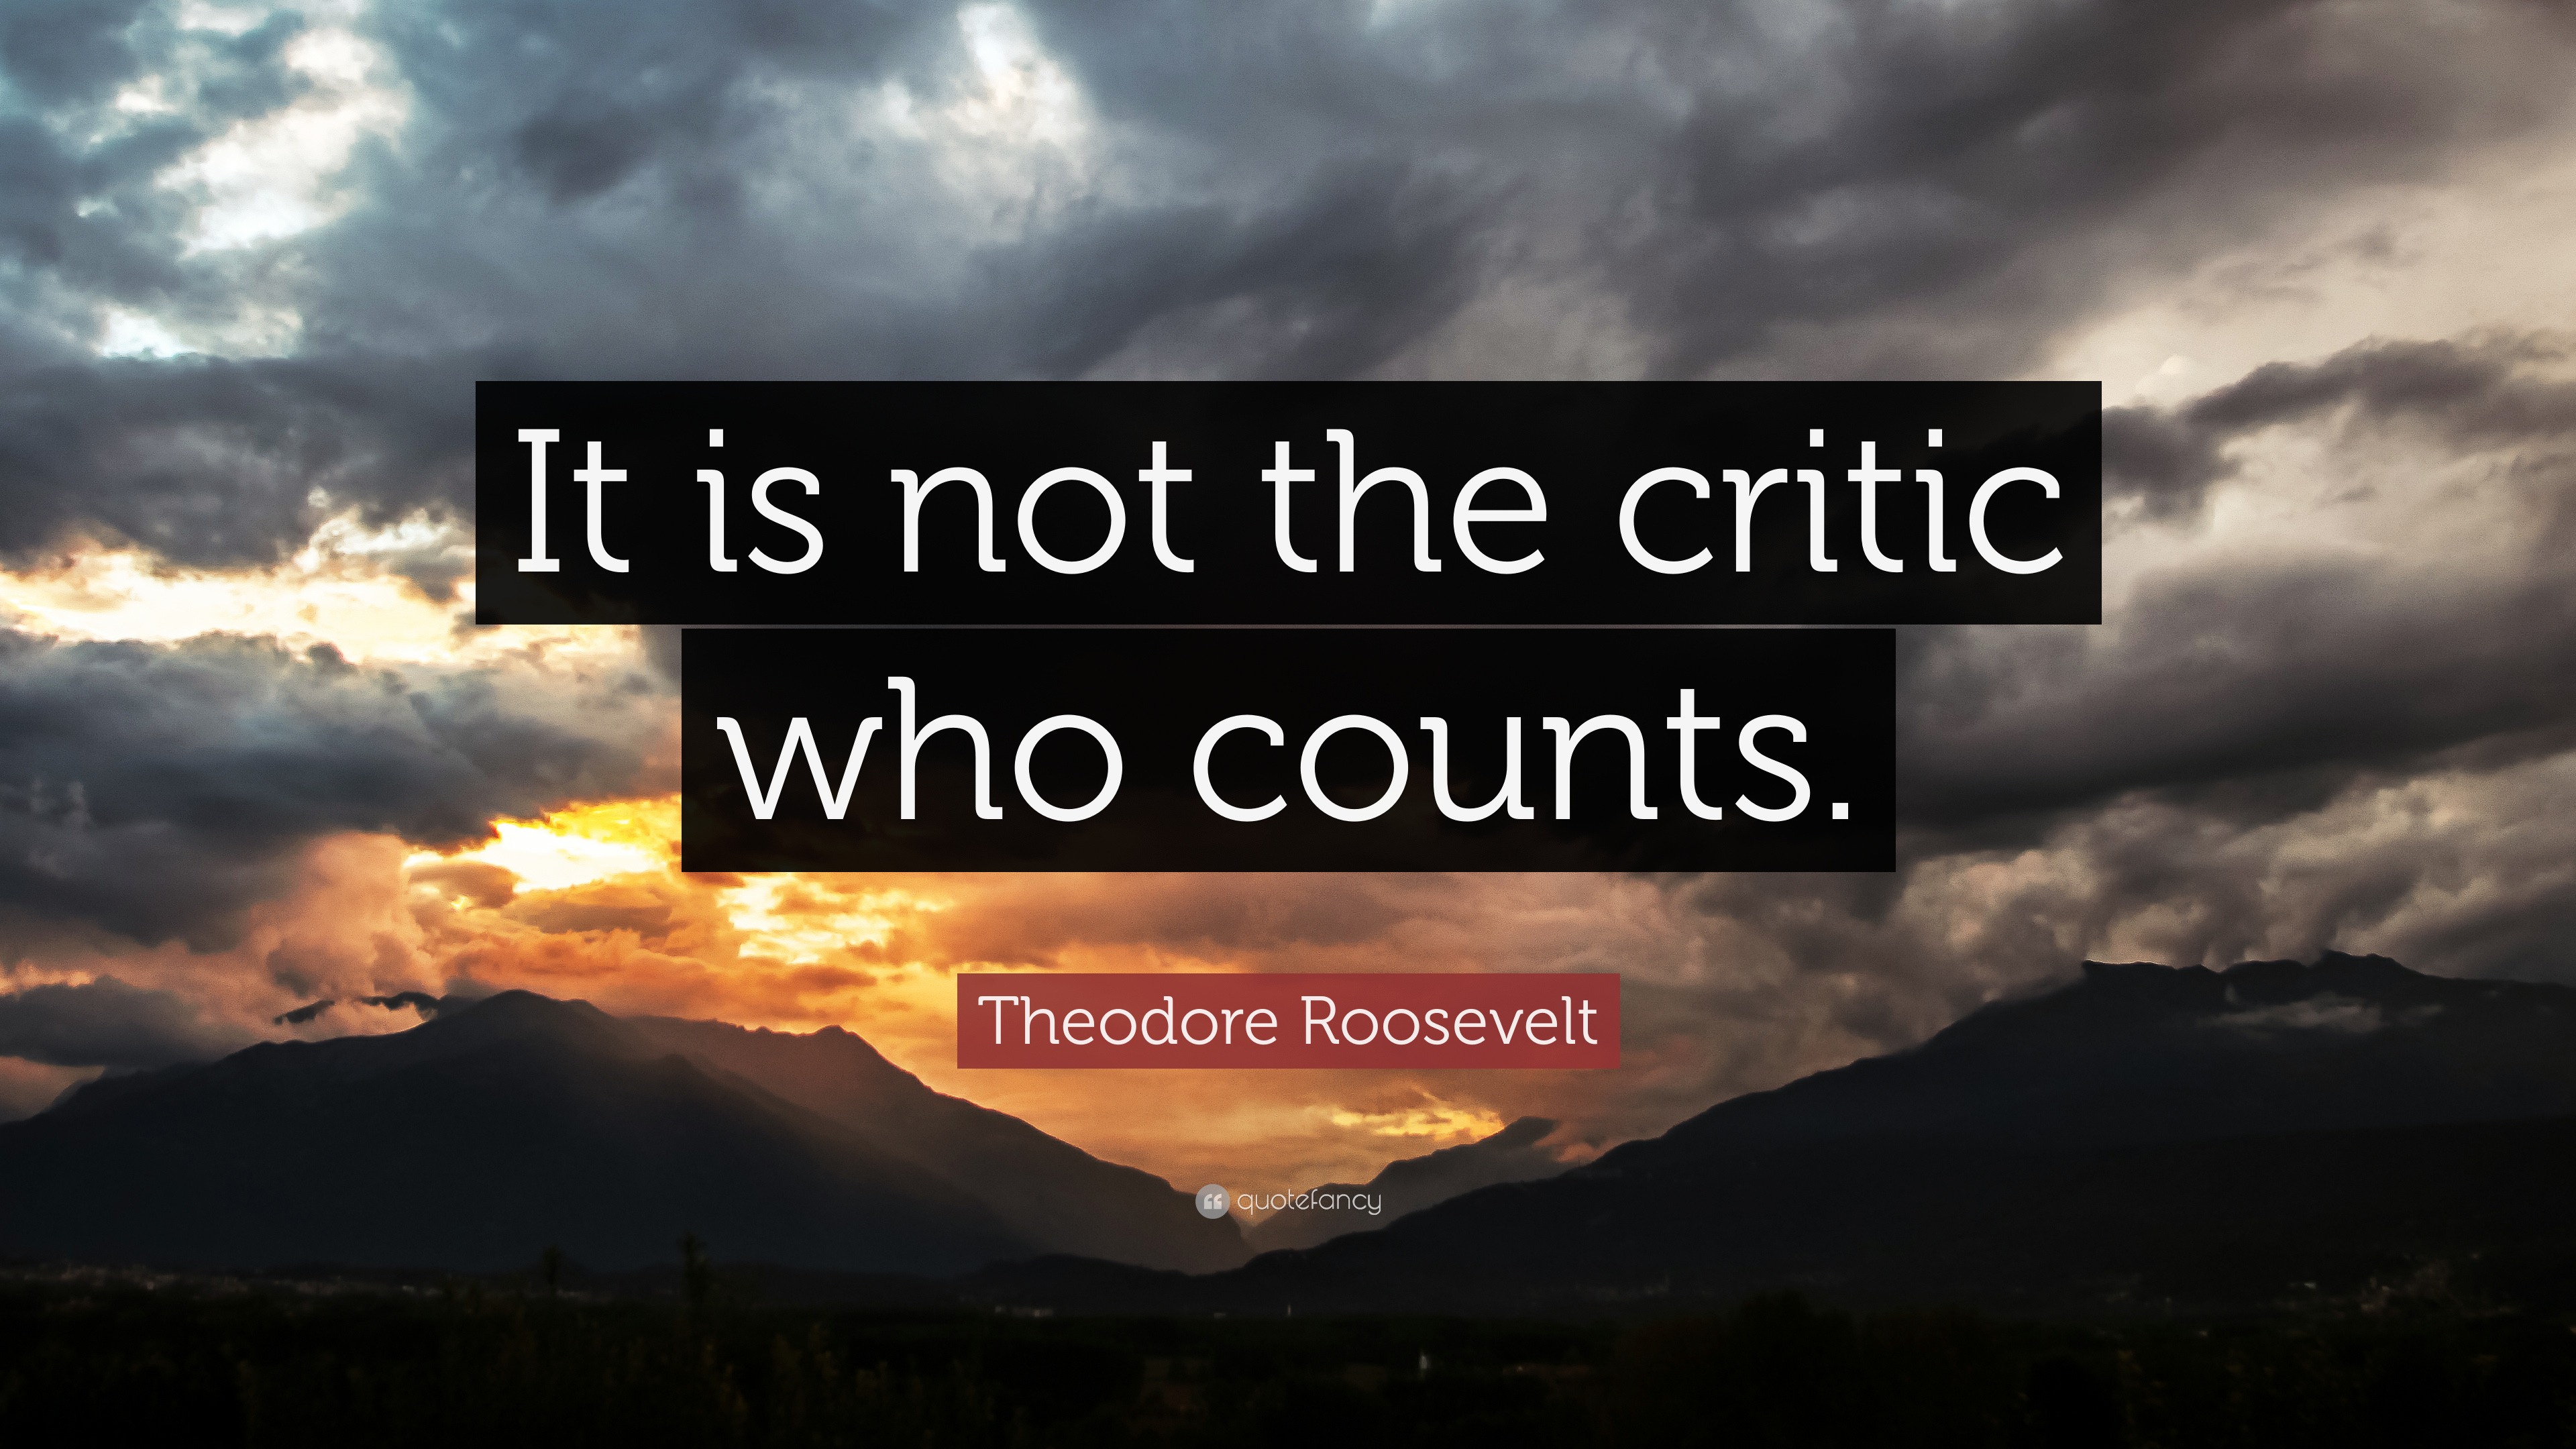 it's not the critic who counts speech